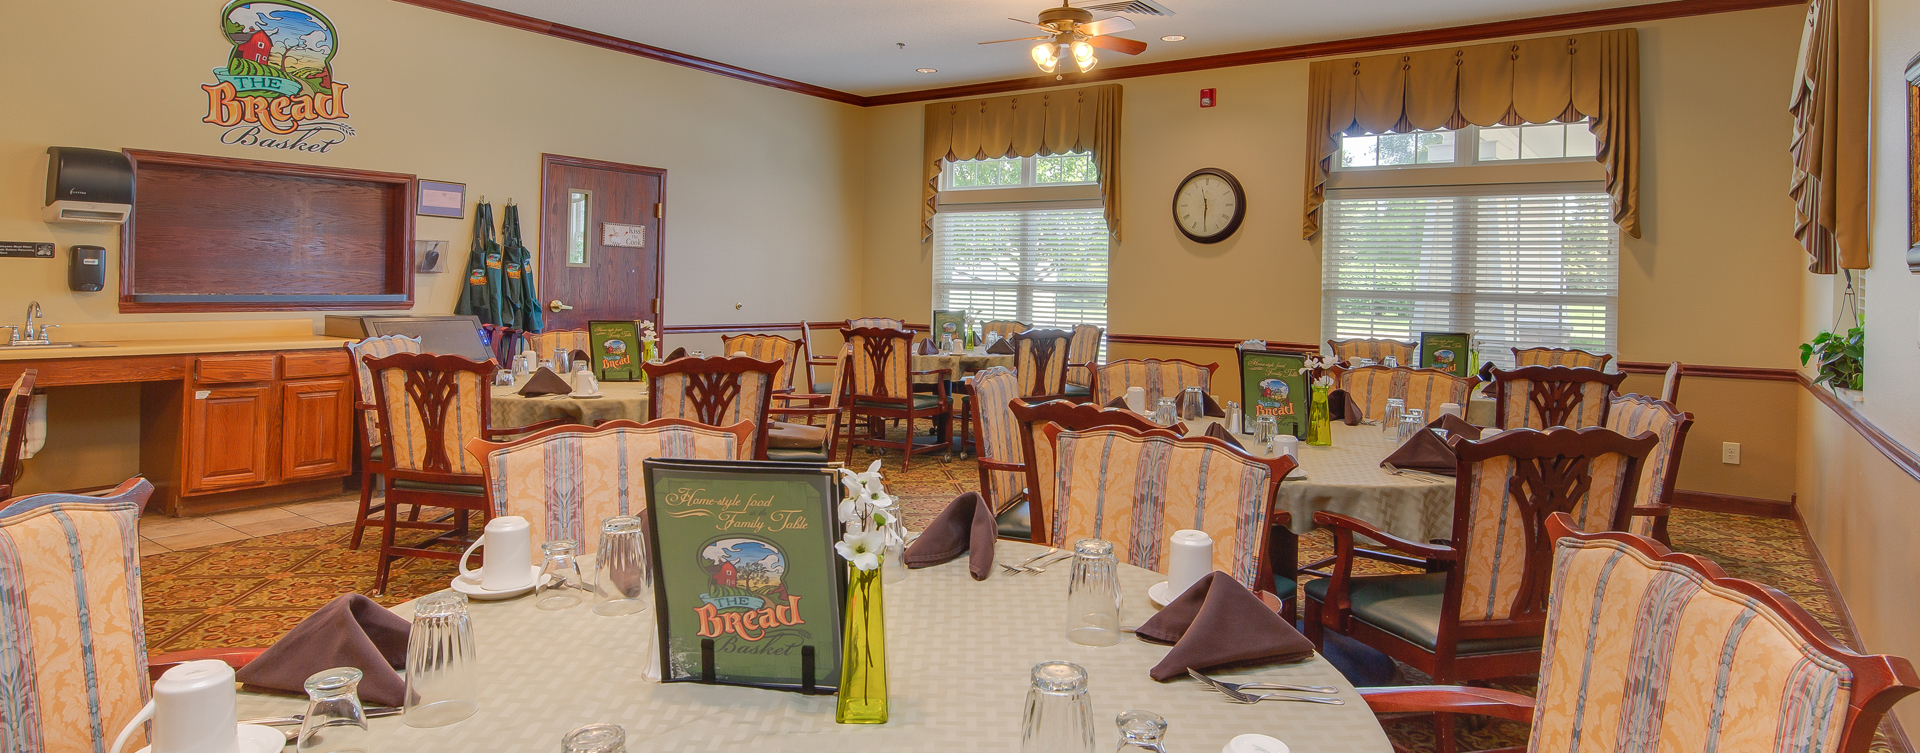 Enjoy homestyle food with made-from-scratch recipes in our dining room at Bickford of Portage